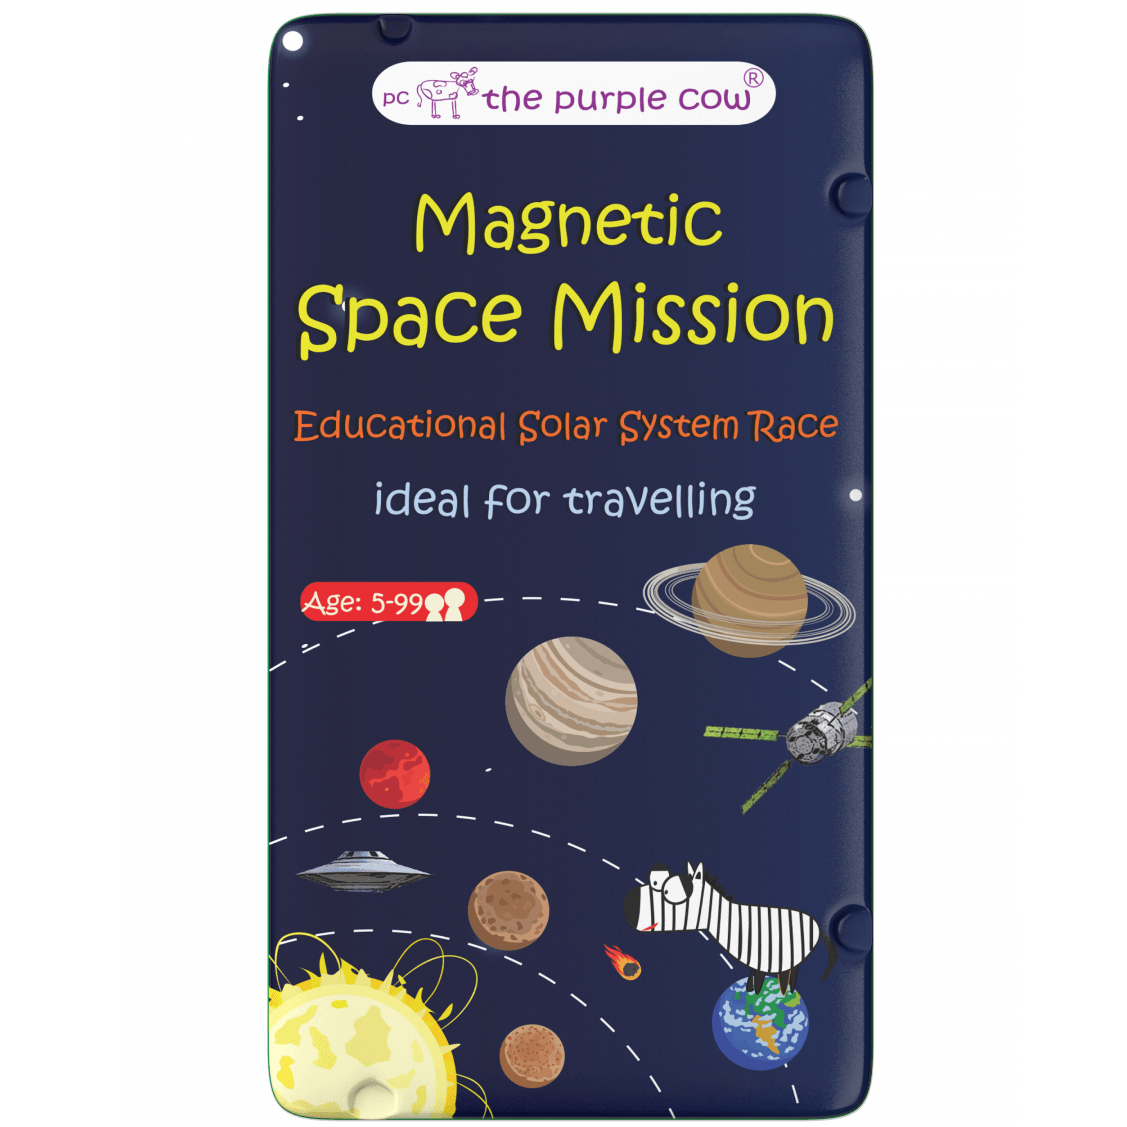 The Purple Cow: Magretic Travel Game Cosmic Mission